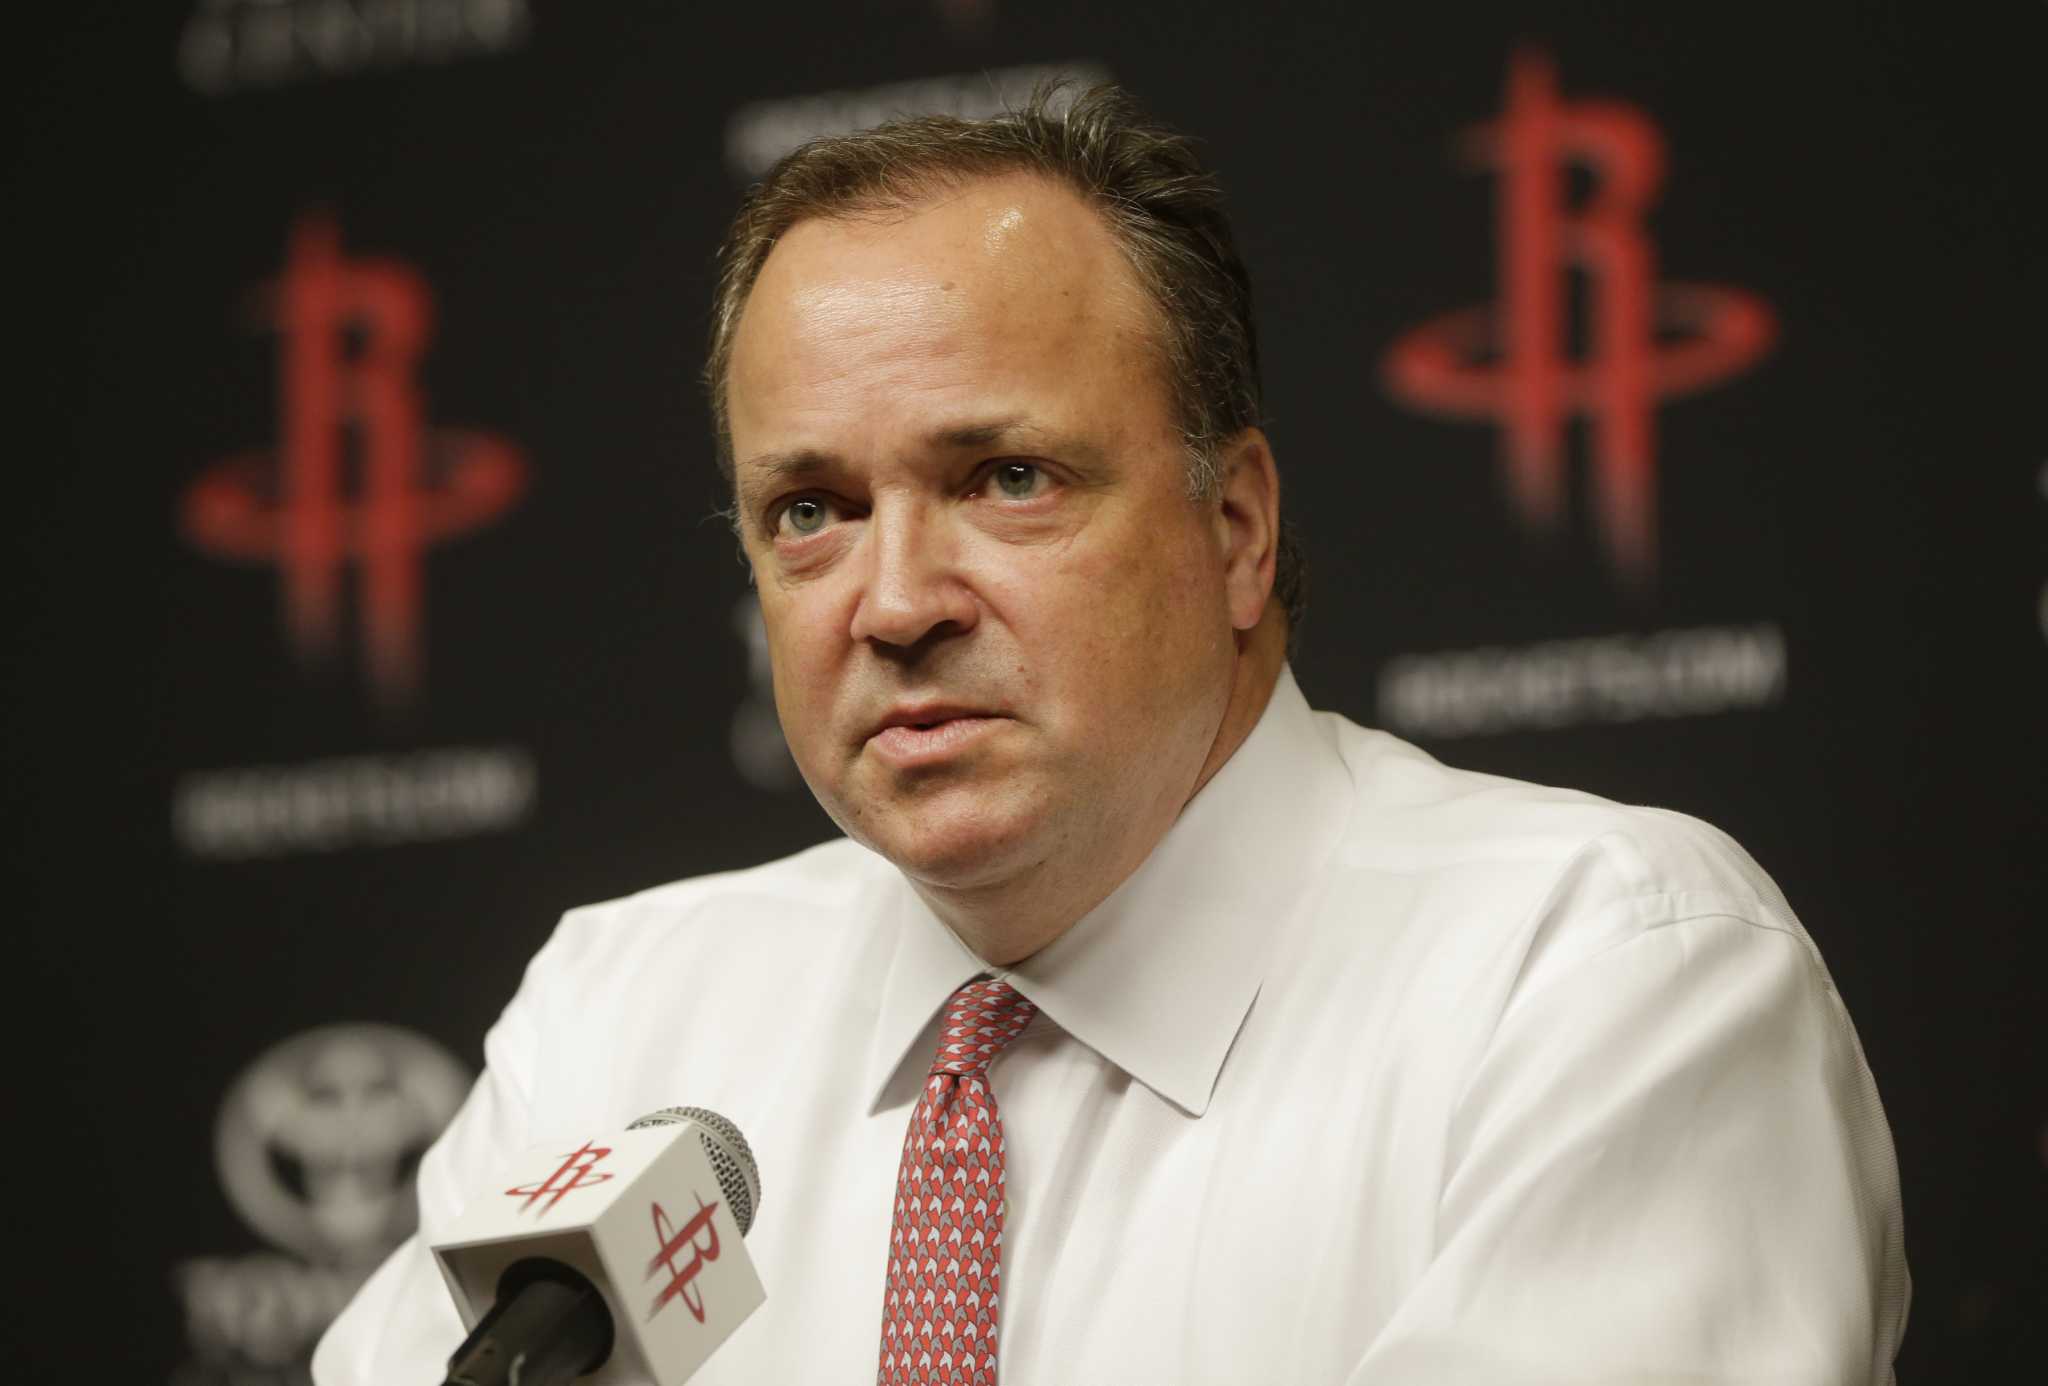 Former Rockets’ Executive Tad Brown Joining 76ers As CEO